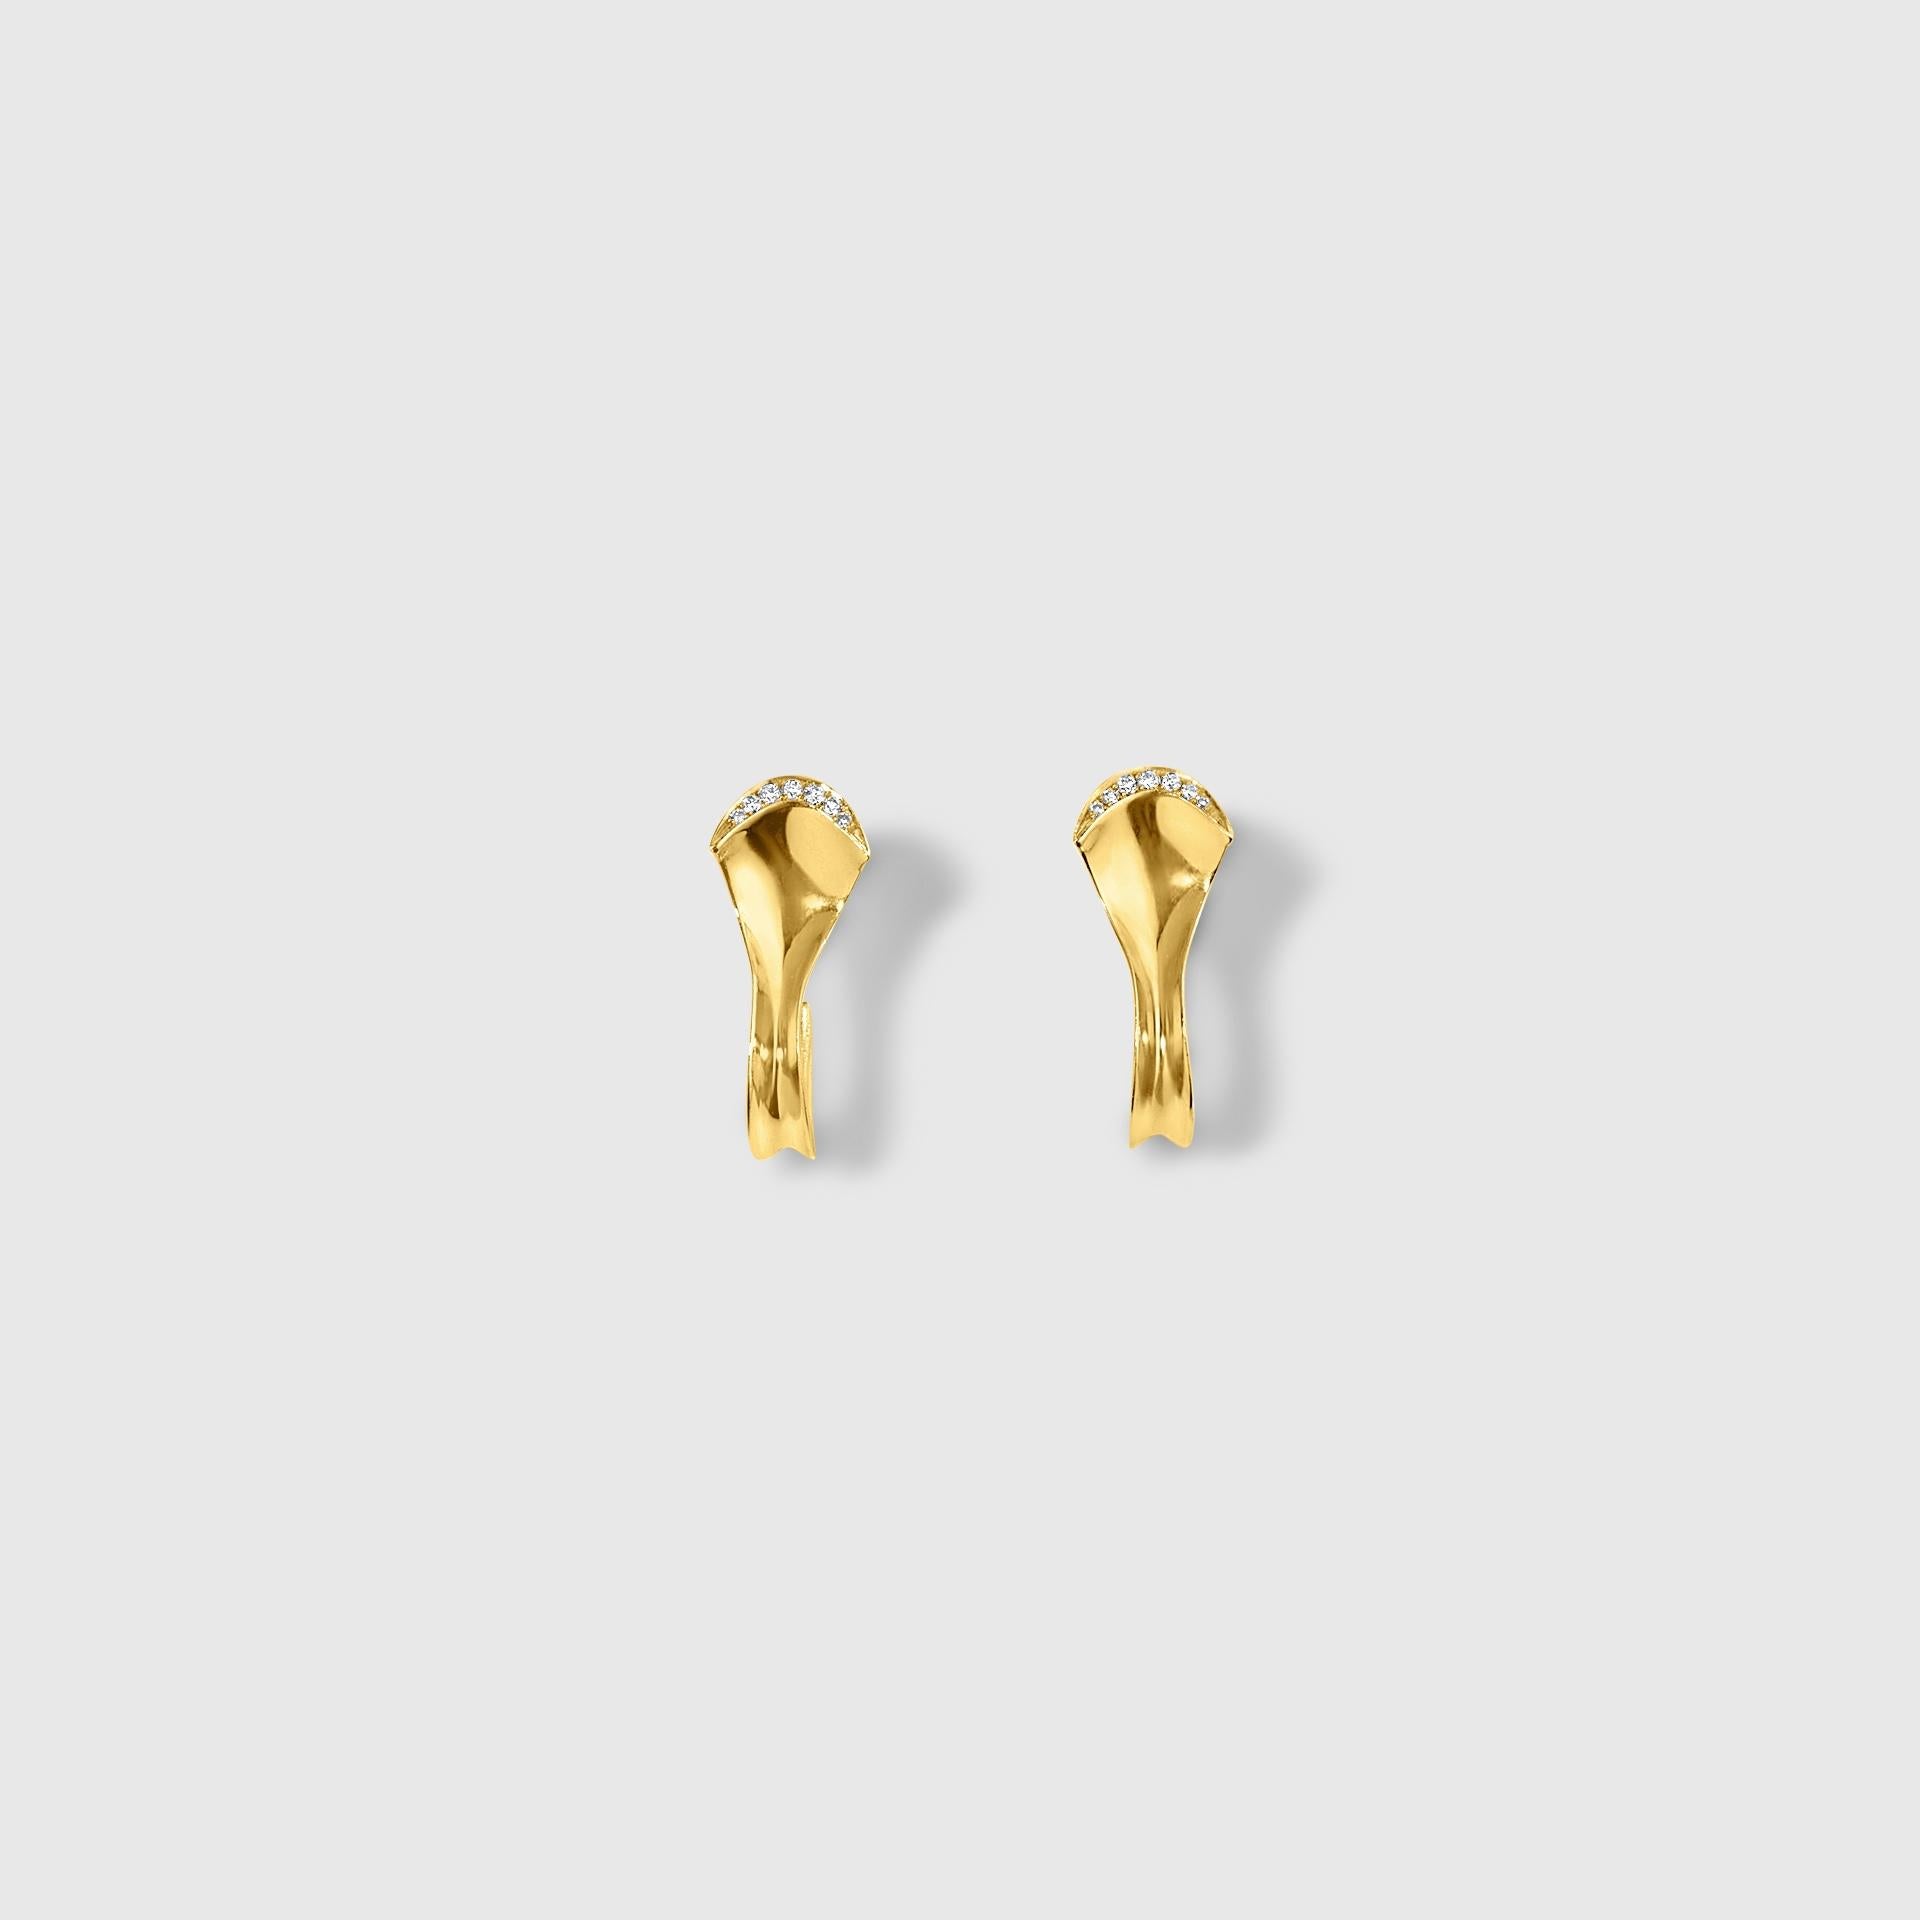 Sculptural Contemporary, Couture 18K Gold Earrings with Natural White Diamonds For Sale 9